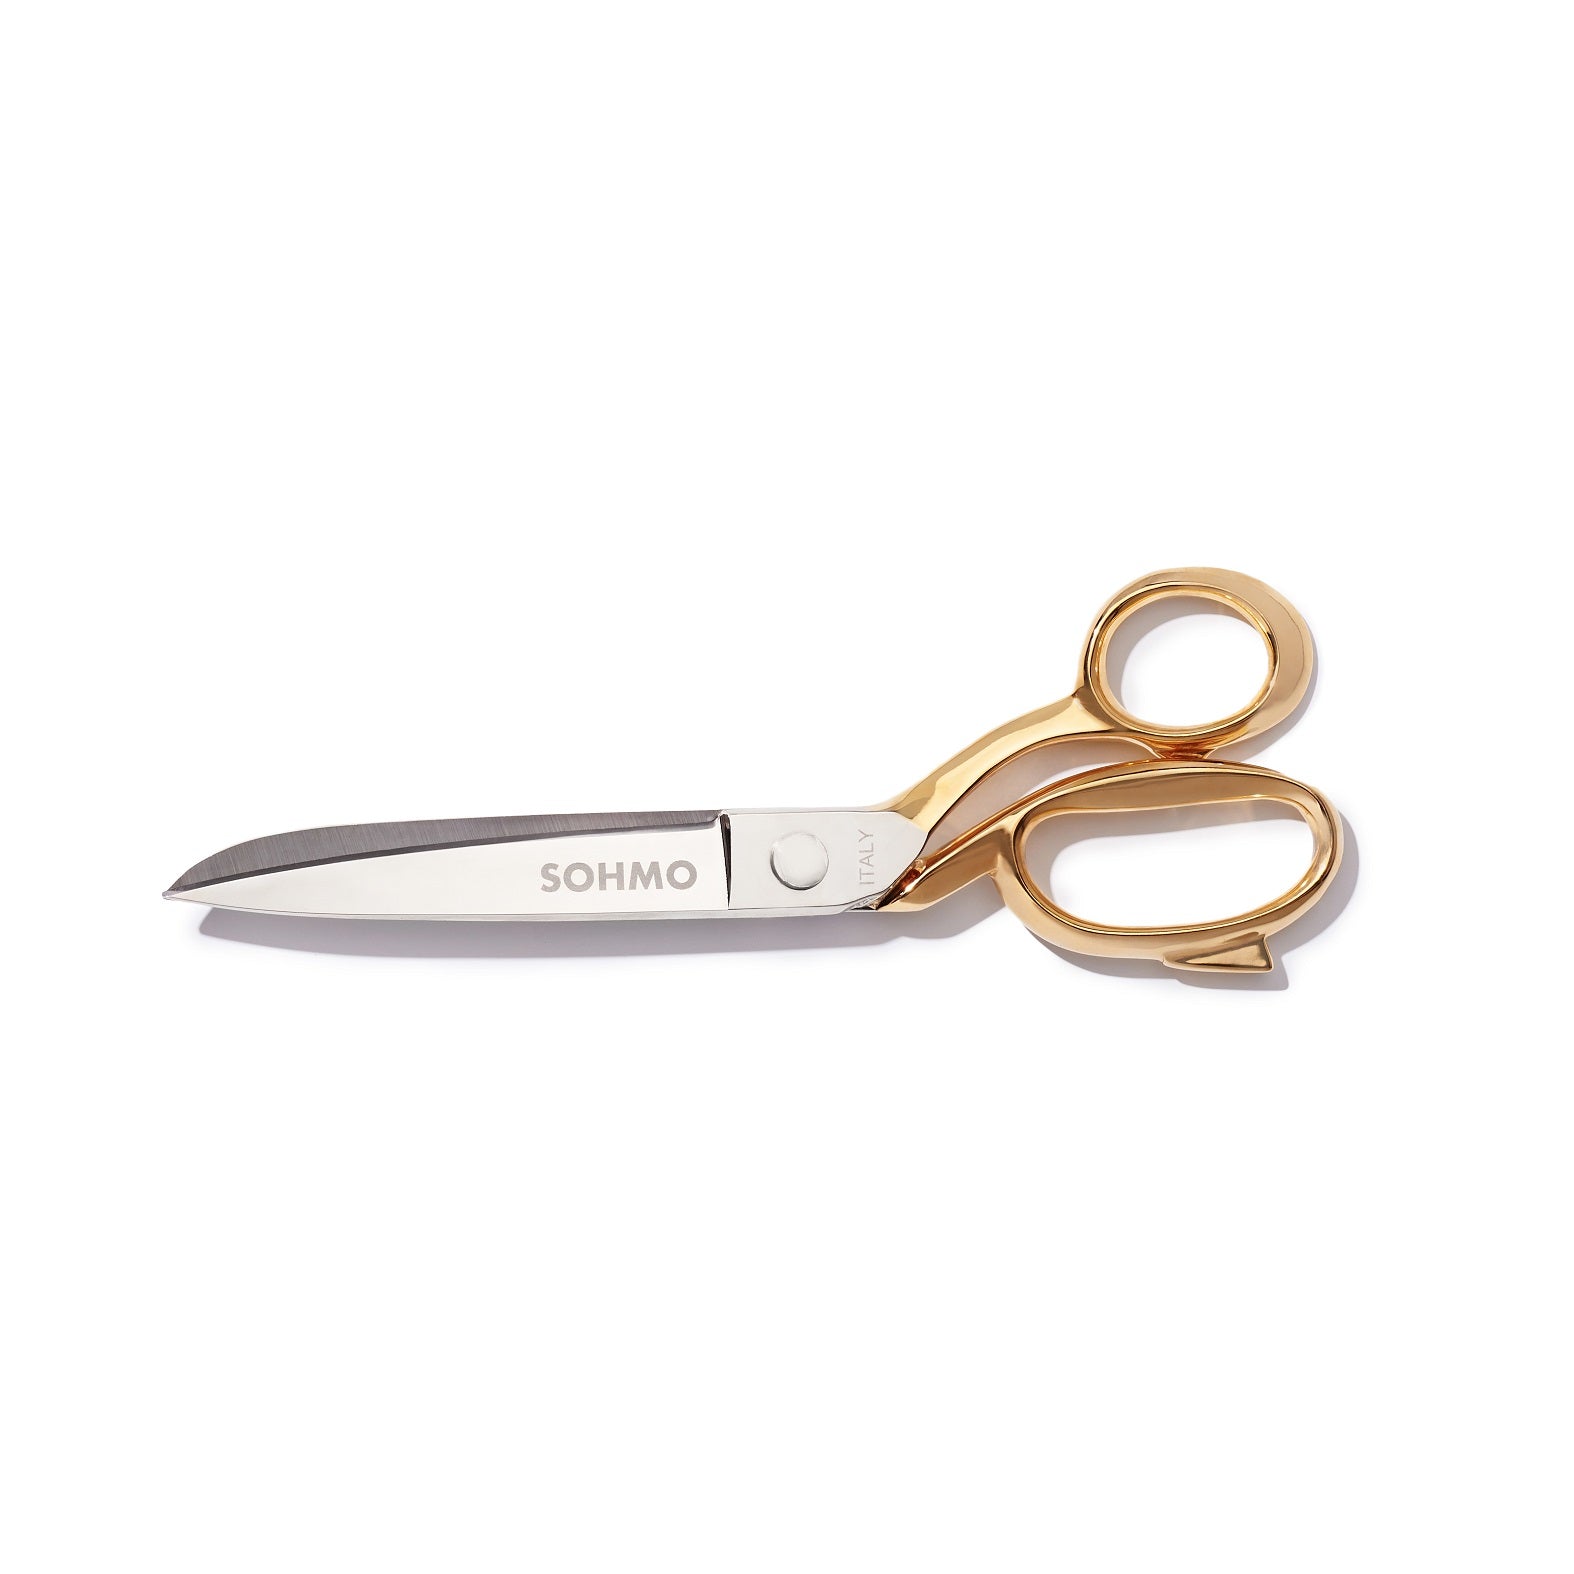 A large pair of fabric scissors with gold handles